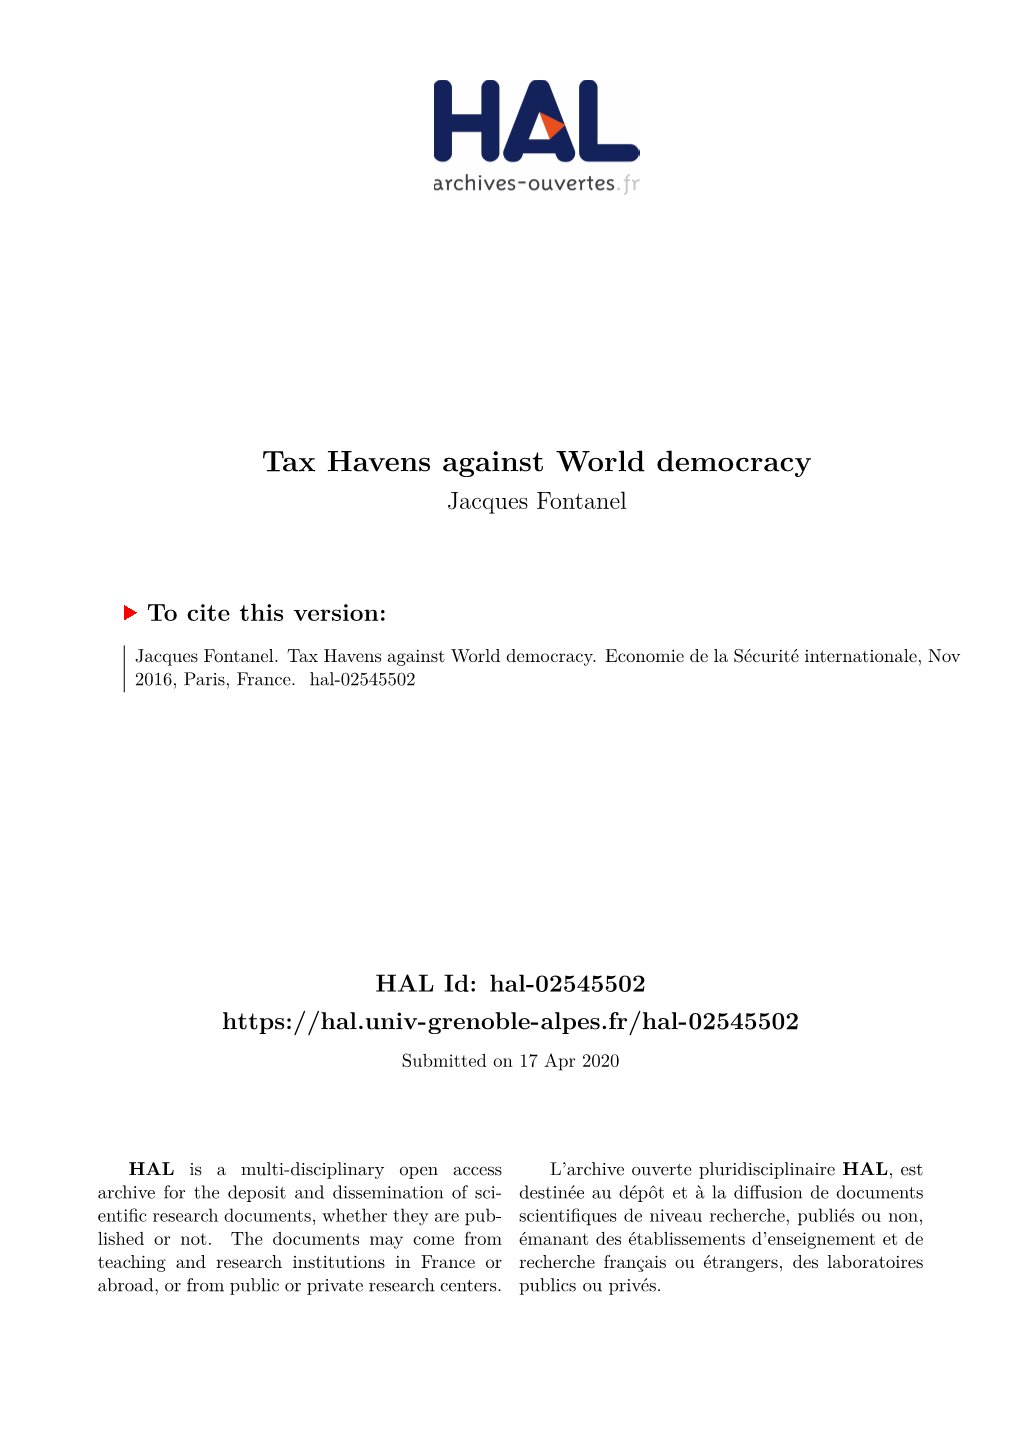 Tax Havens Against World Democracy Jacques Fontanel